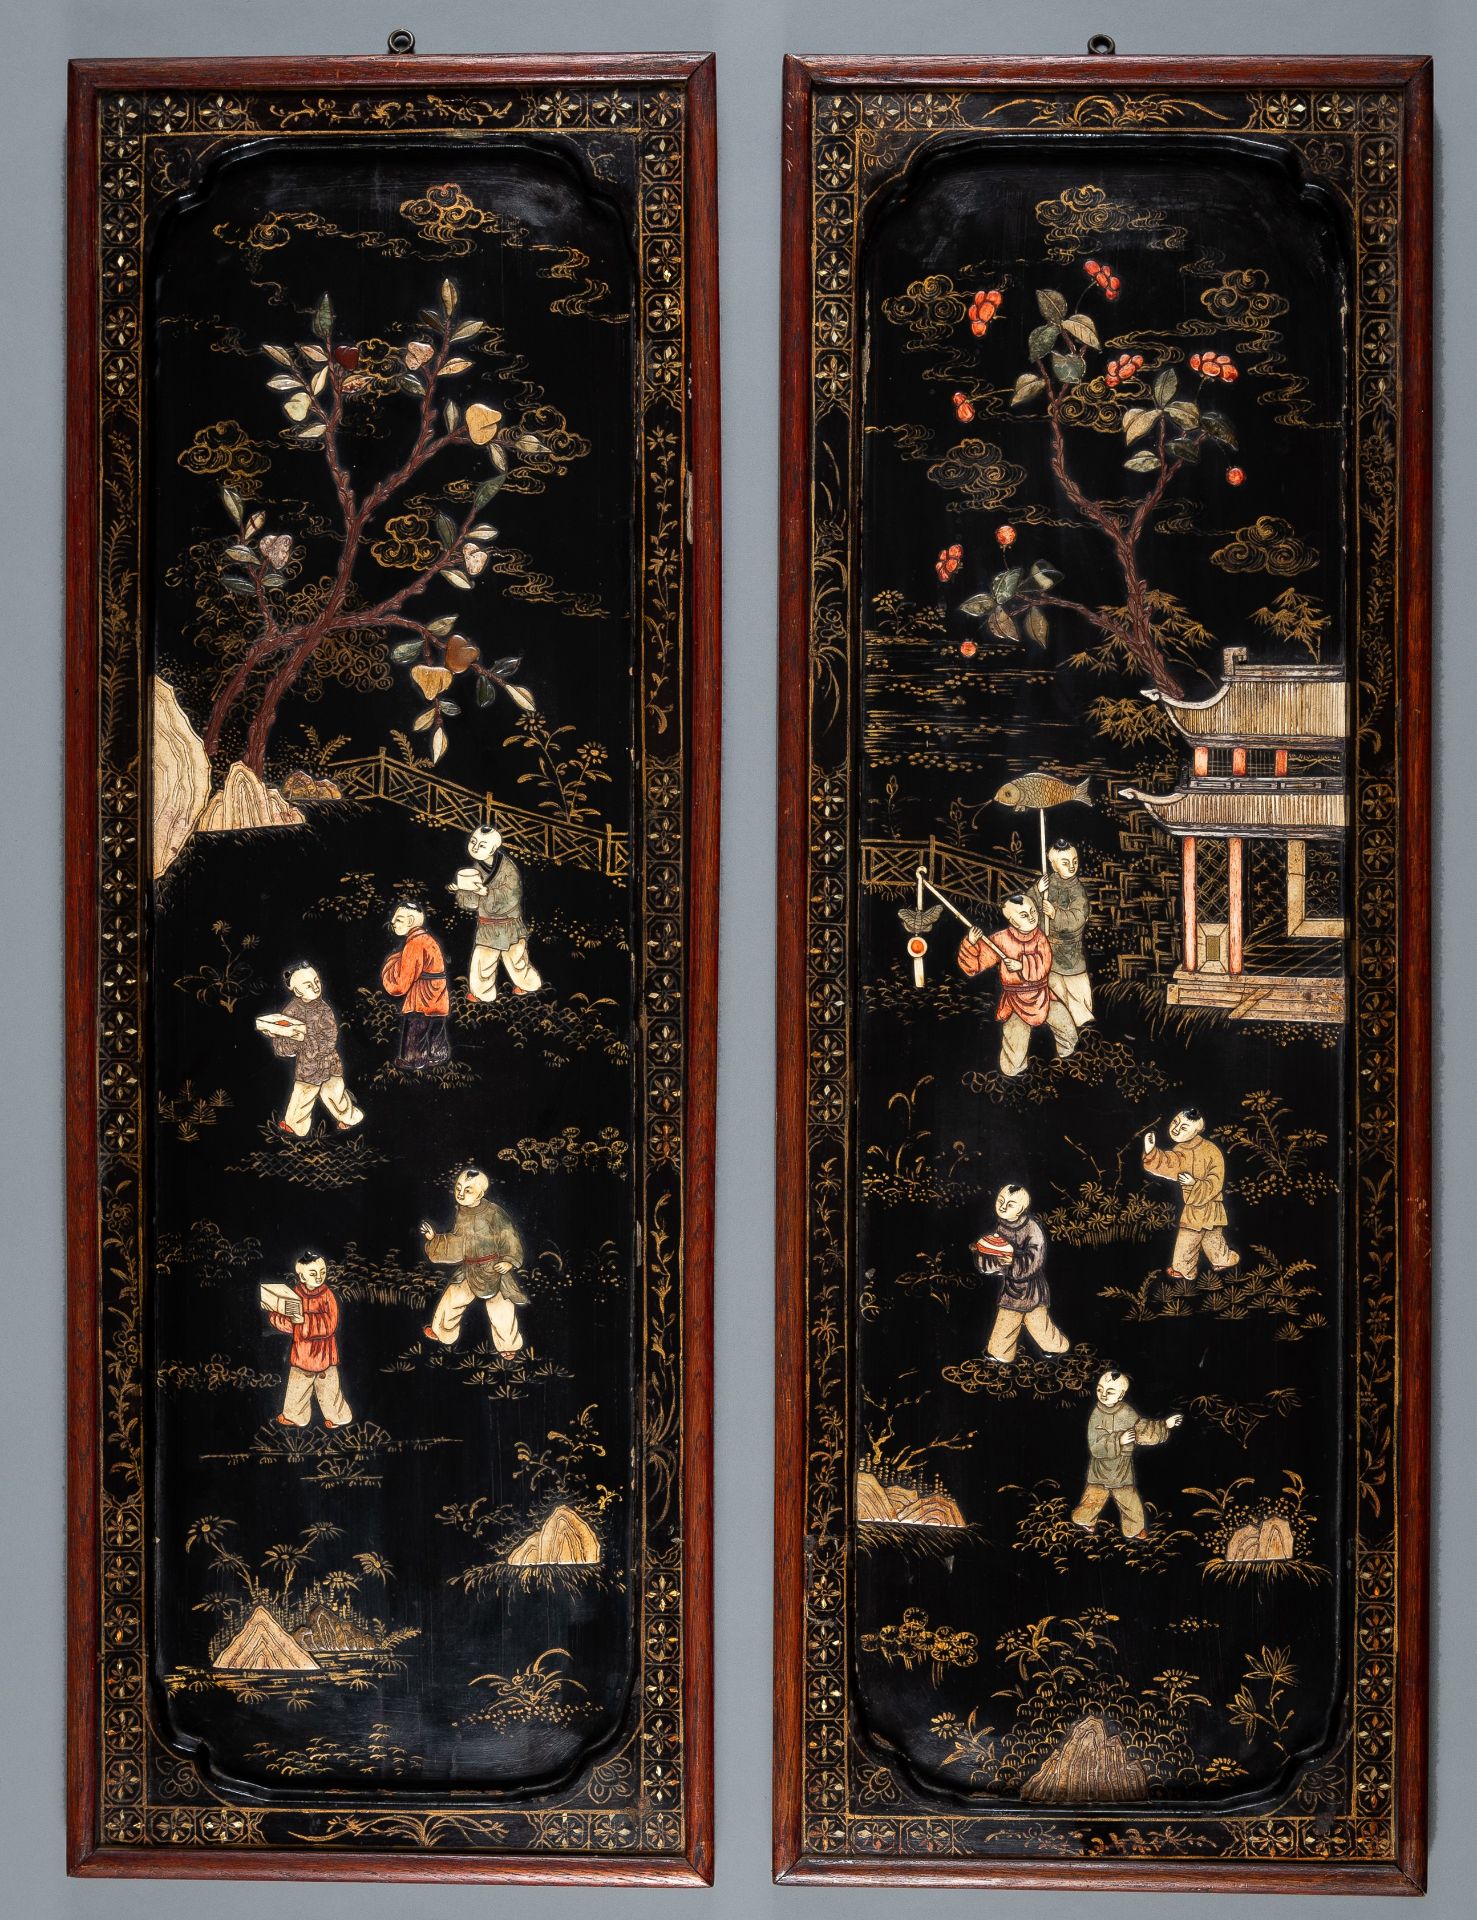 A PAIR OF INLAID LACQUERD WOOD PANELS, LATE QING